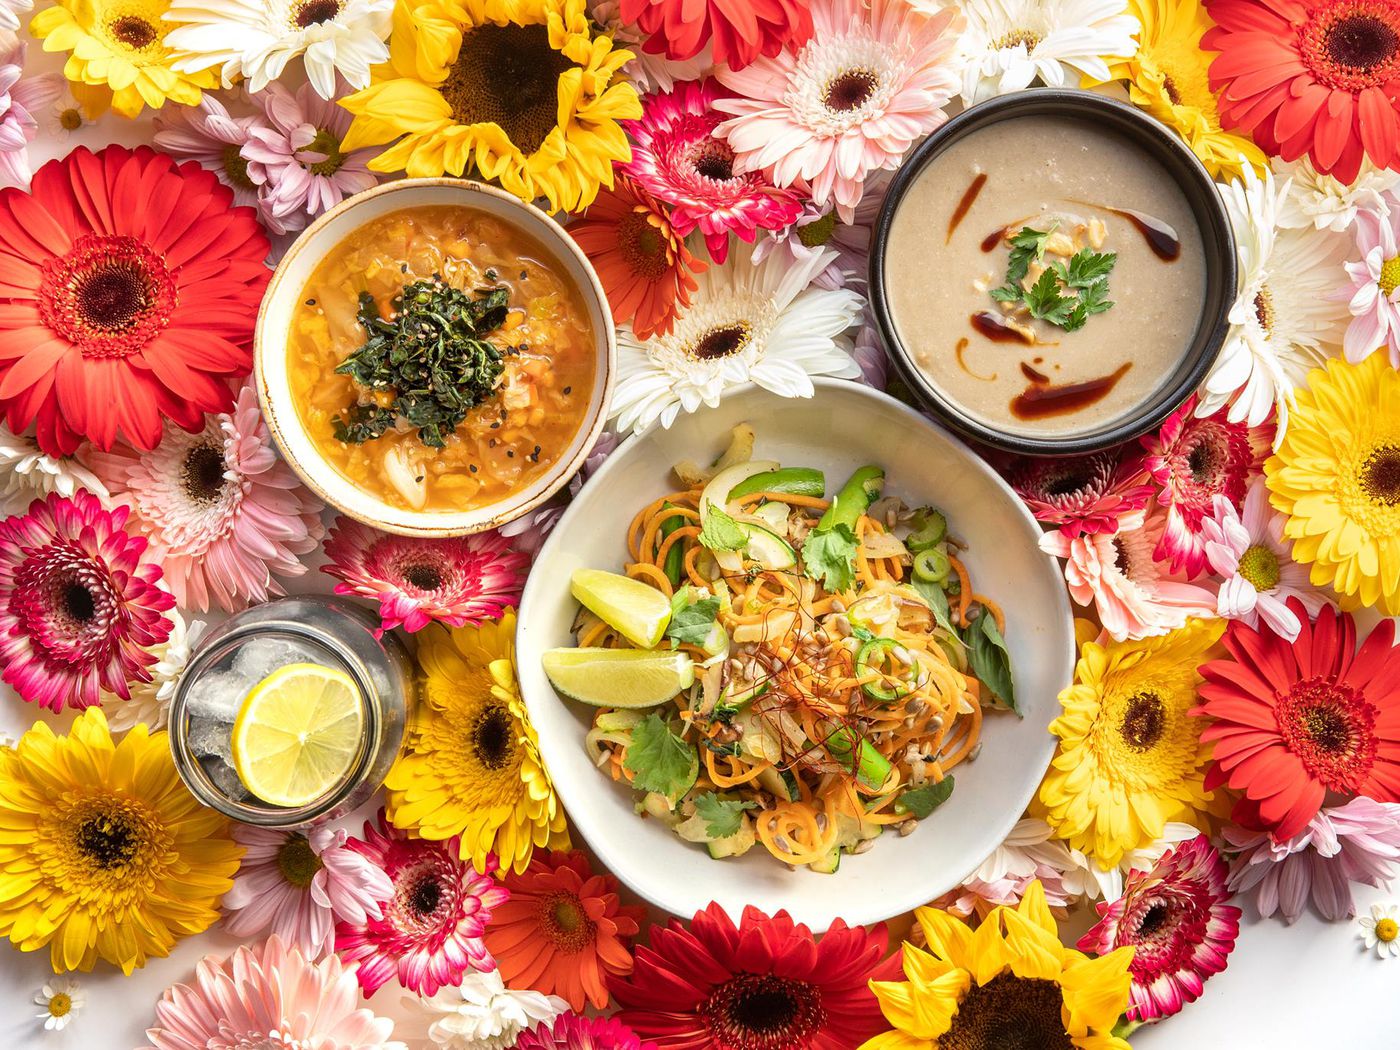 Flower Child S Wildly Popular Healthy Eats Will Soon Land In The Heights Eater Houston